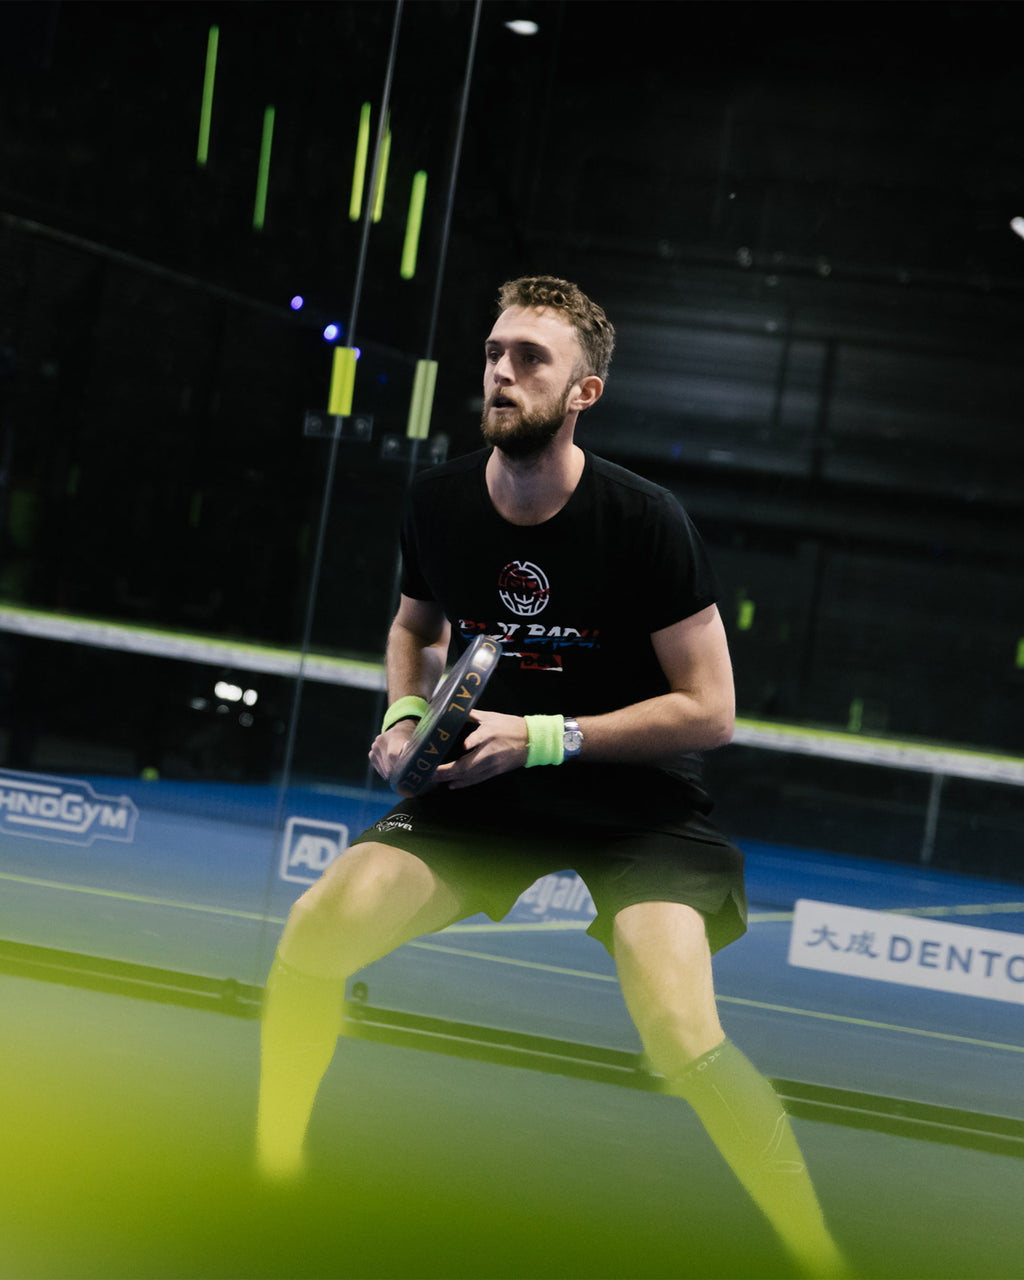 Sporter in action playing padel.